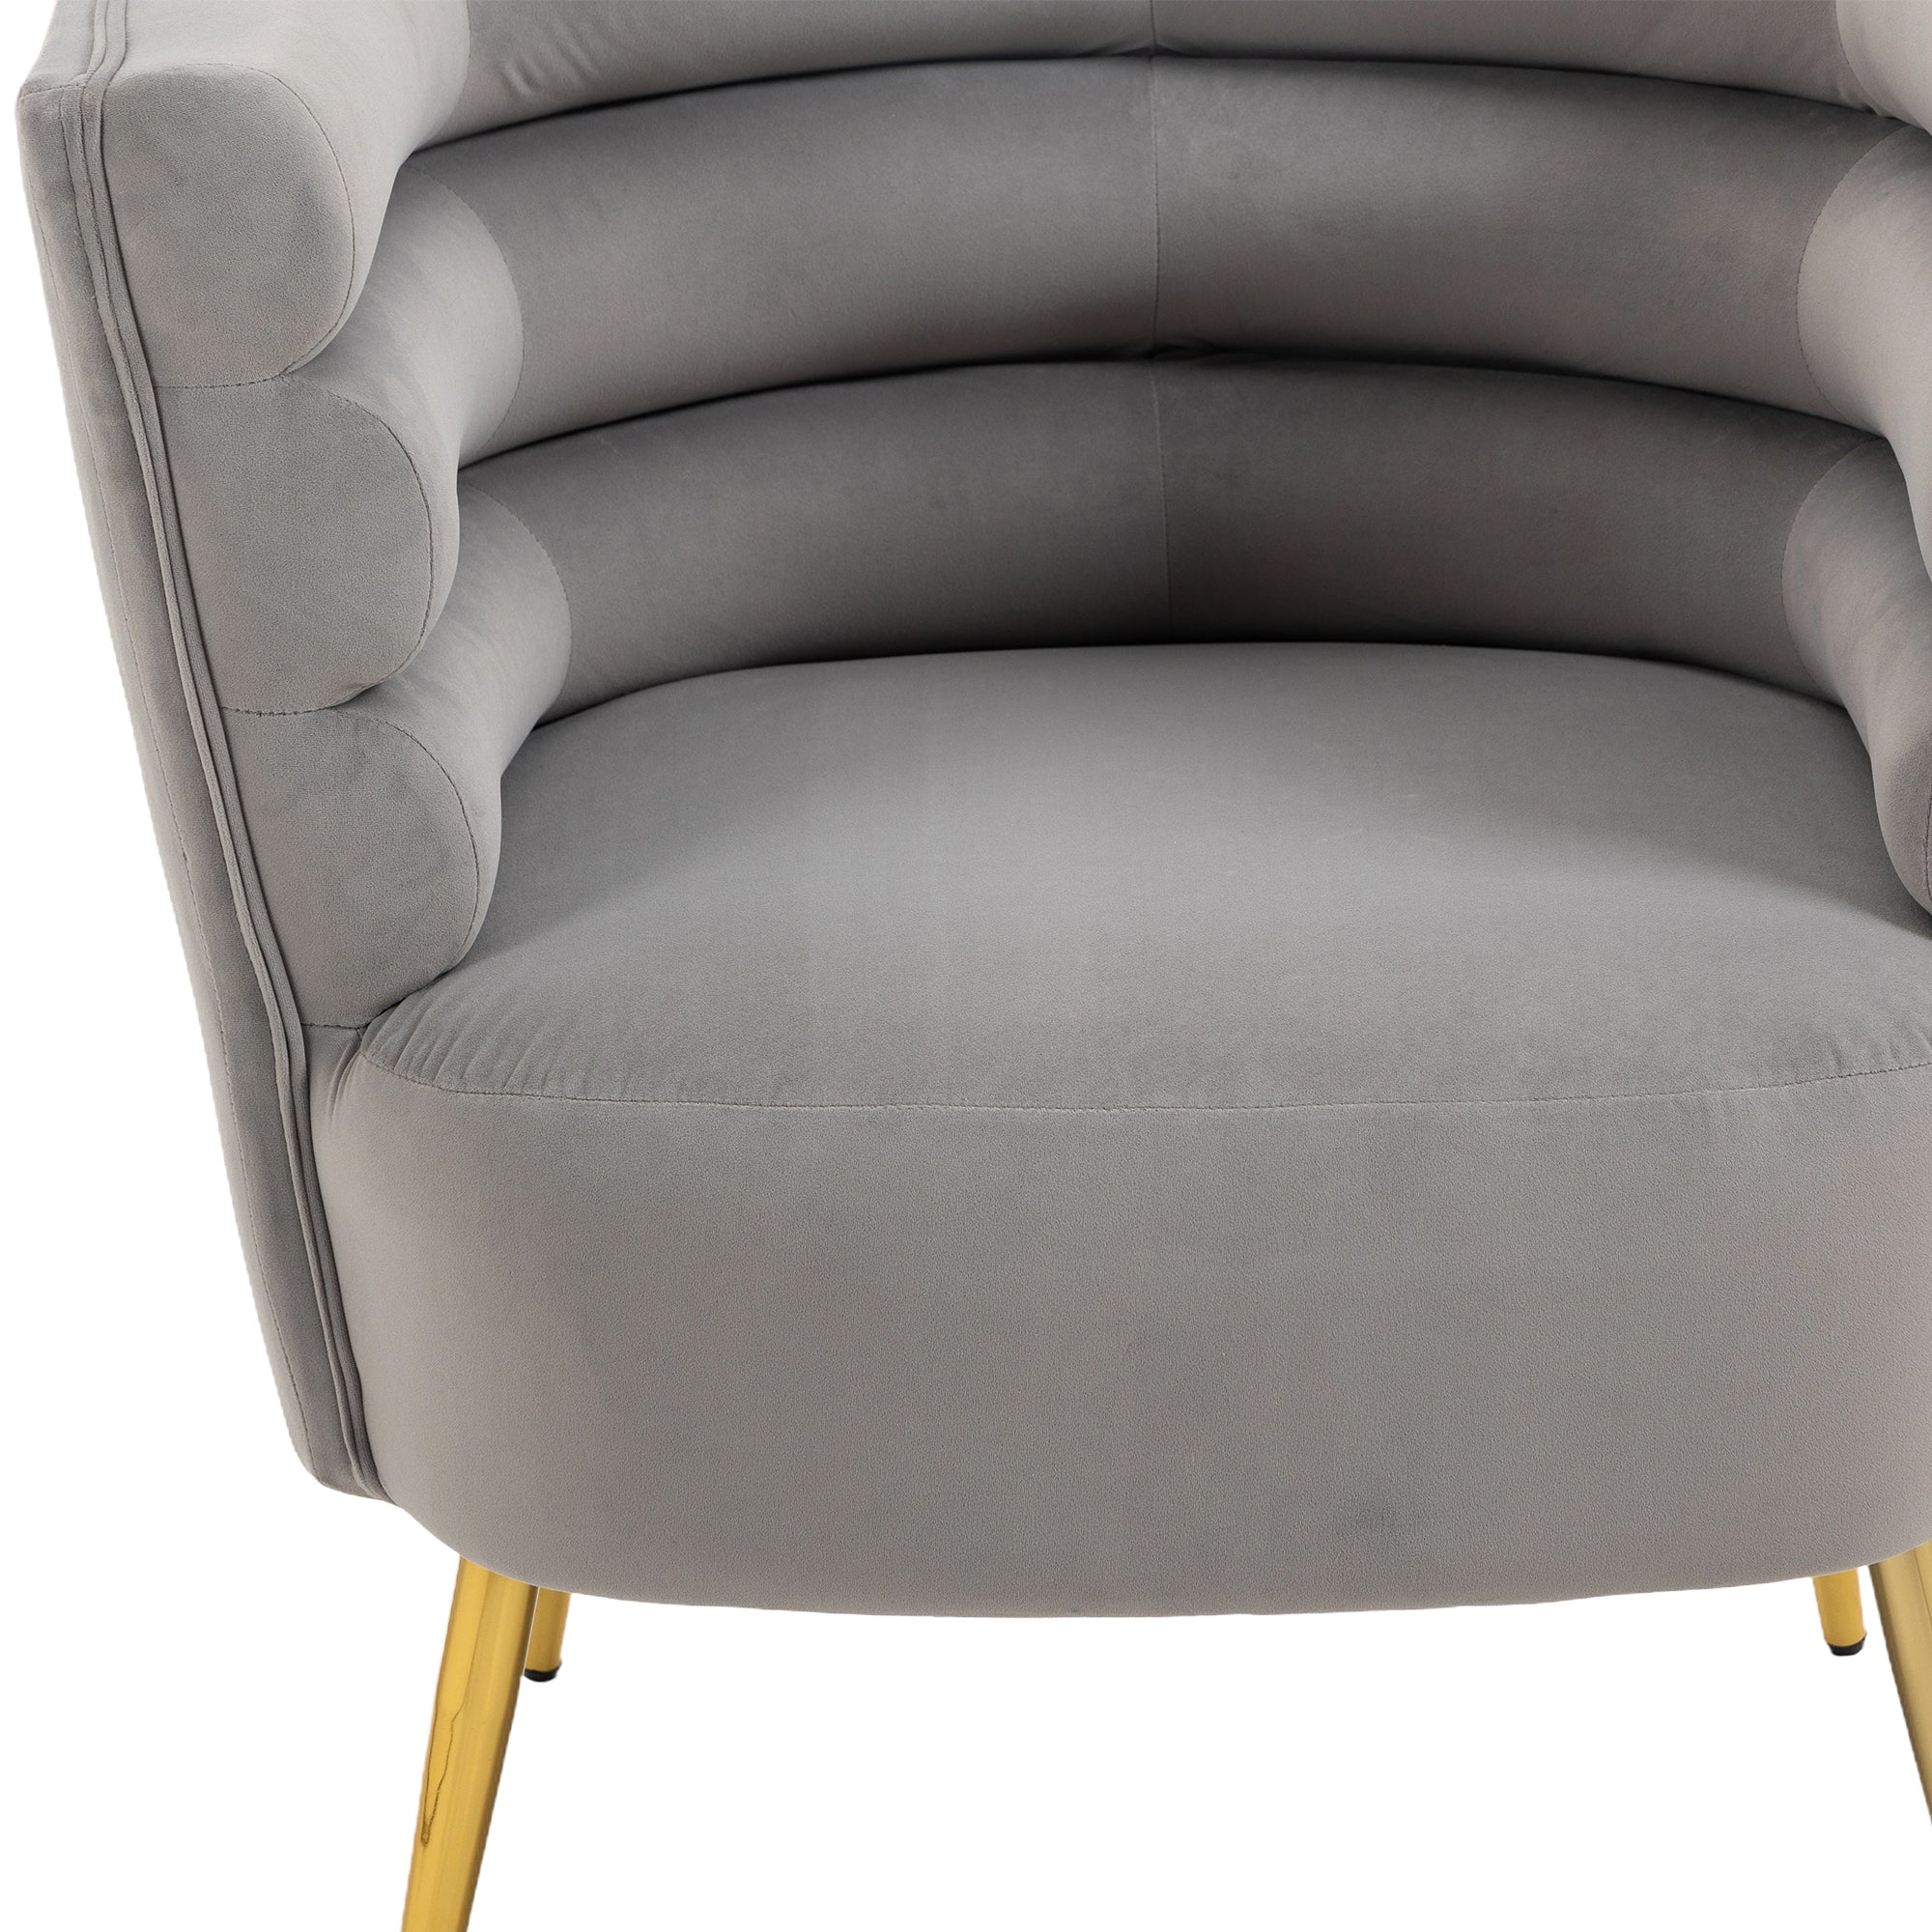 COOLMORE Accent Chair ,leisure single chair with gray-velvet